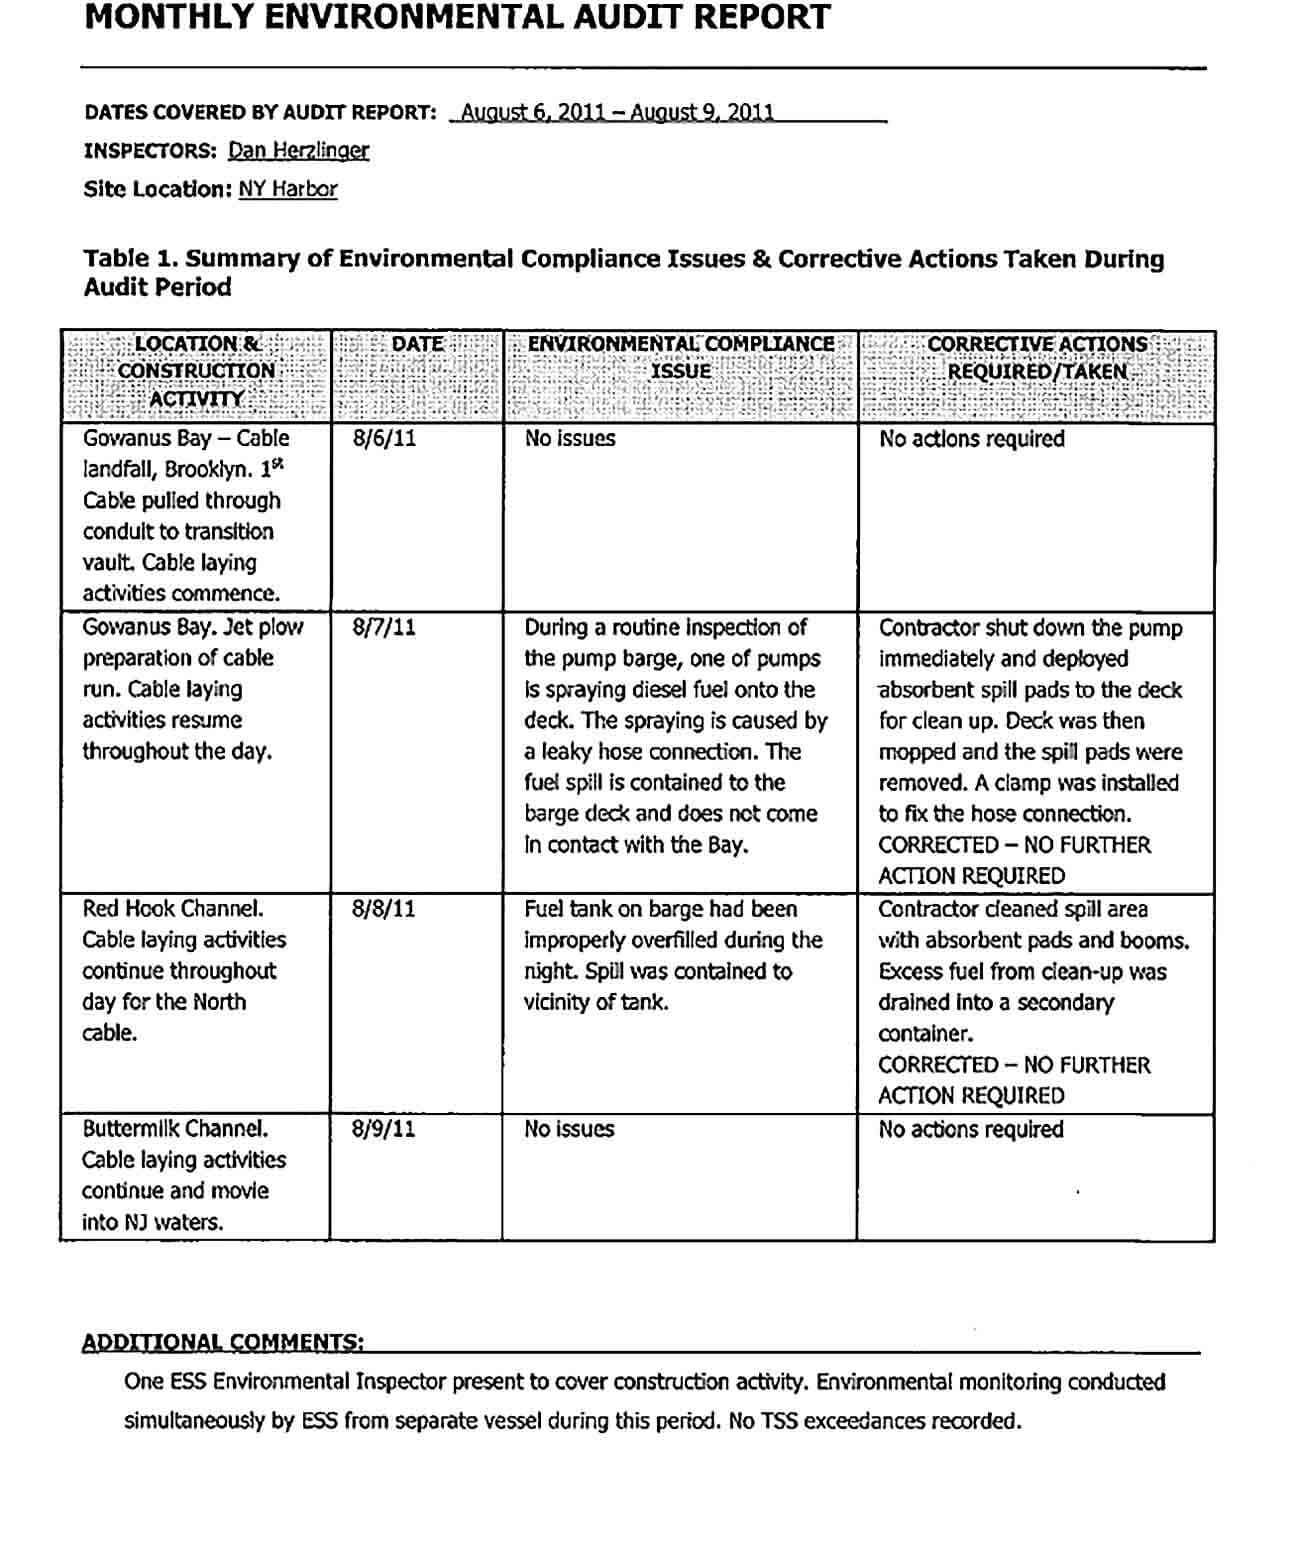 Sample Monthly Environmental Audit Report